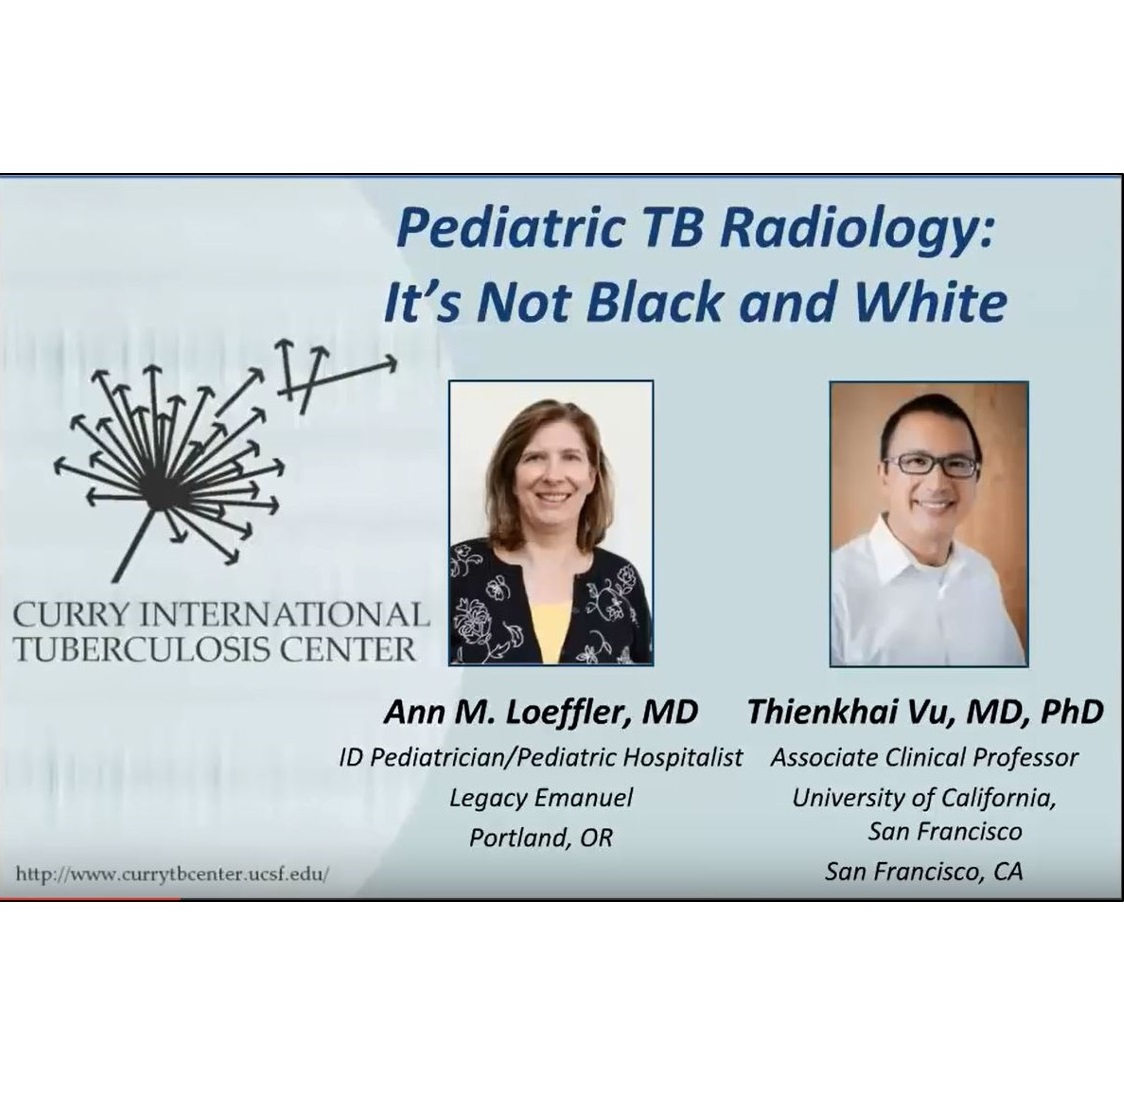 Pediatric TB Radiology: It's Not Black and White